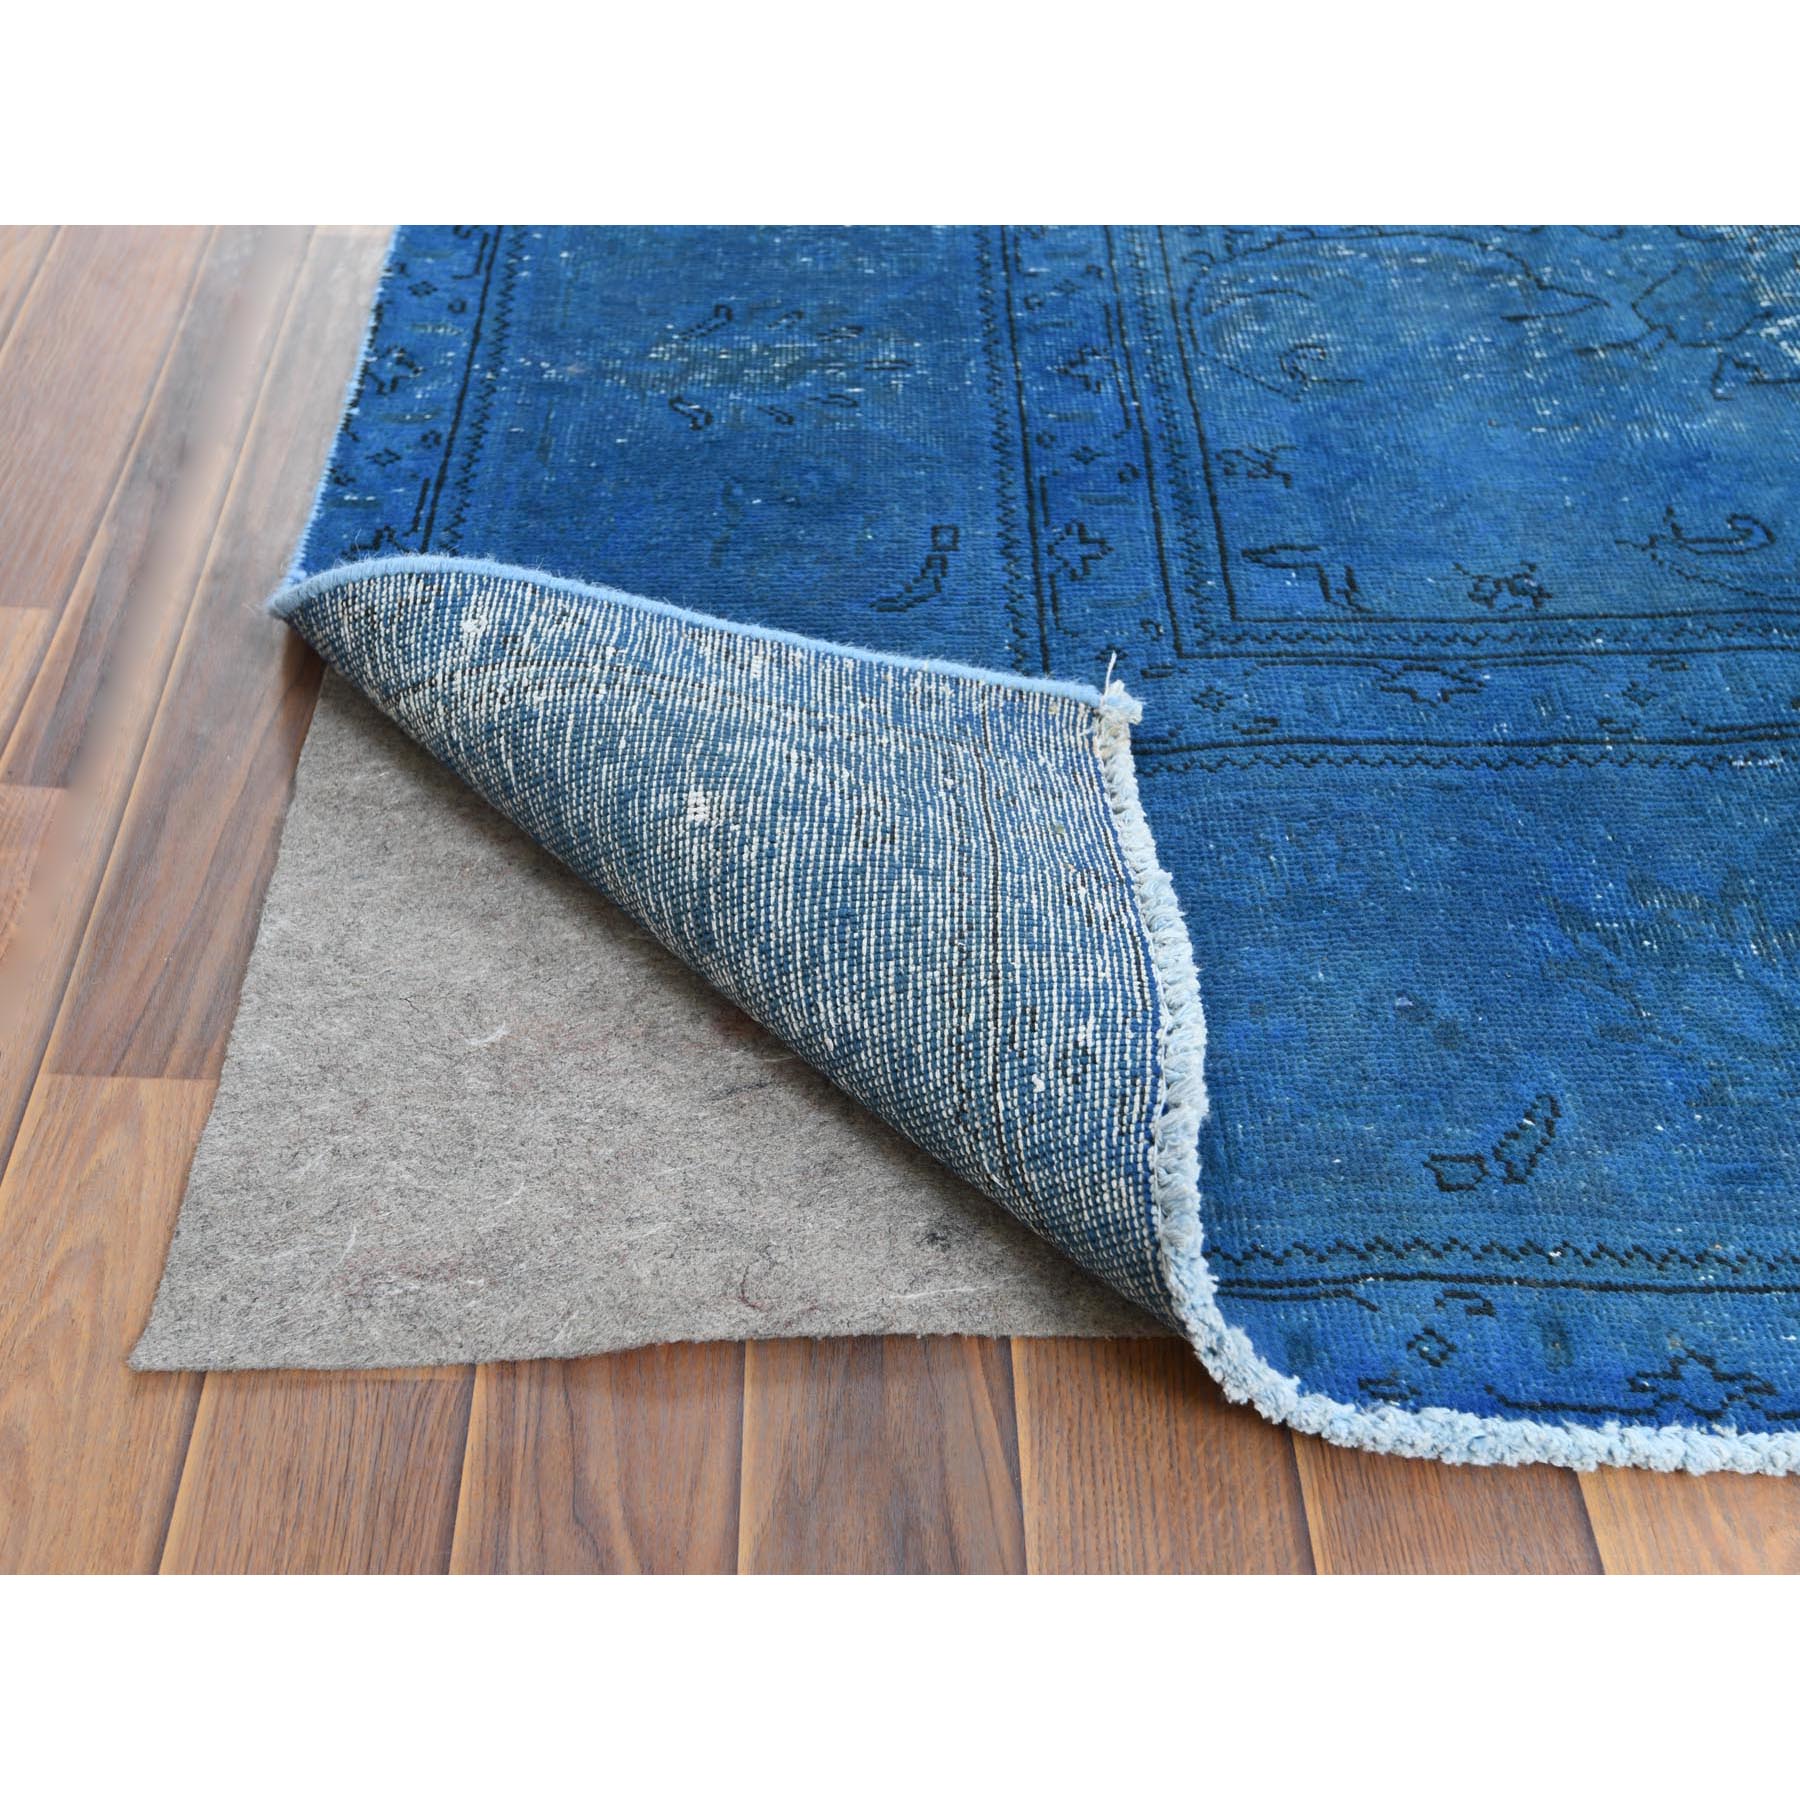 9'8"x10'10" Blue Vintage Overdyed Persian Tabriz Distressed Worn Wool Shaved Down Hand Woven Squarish Oriental Rug 